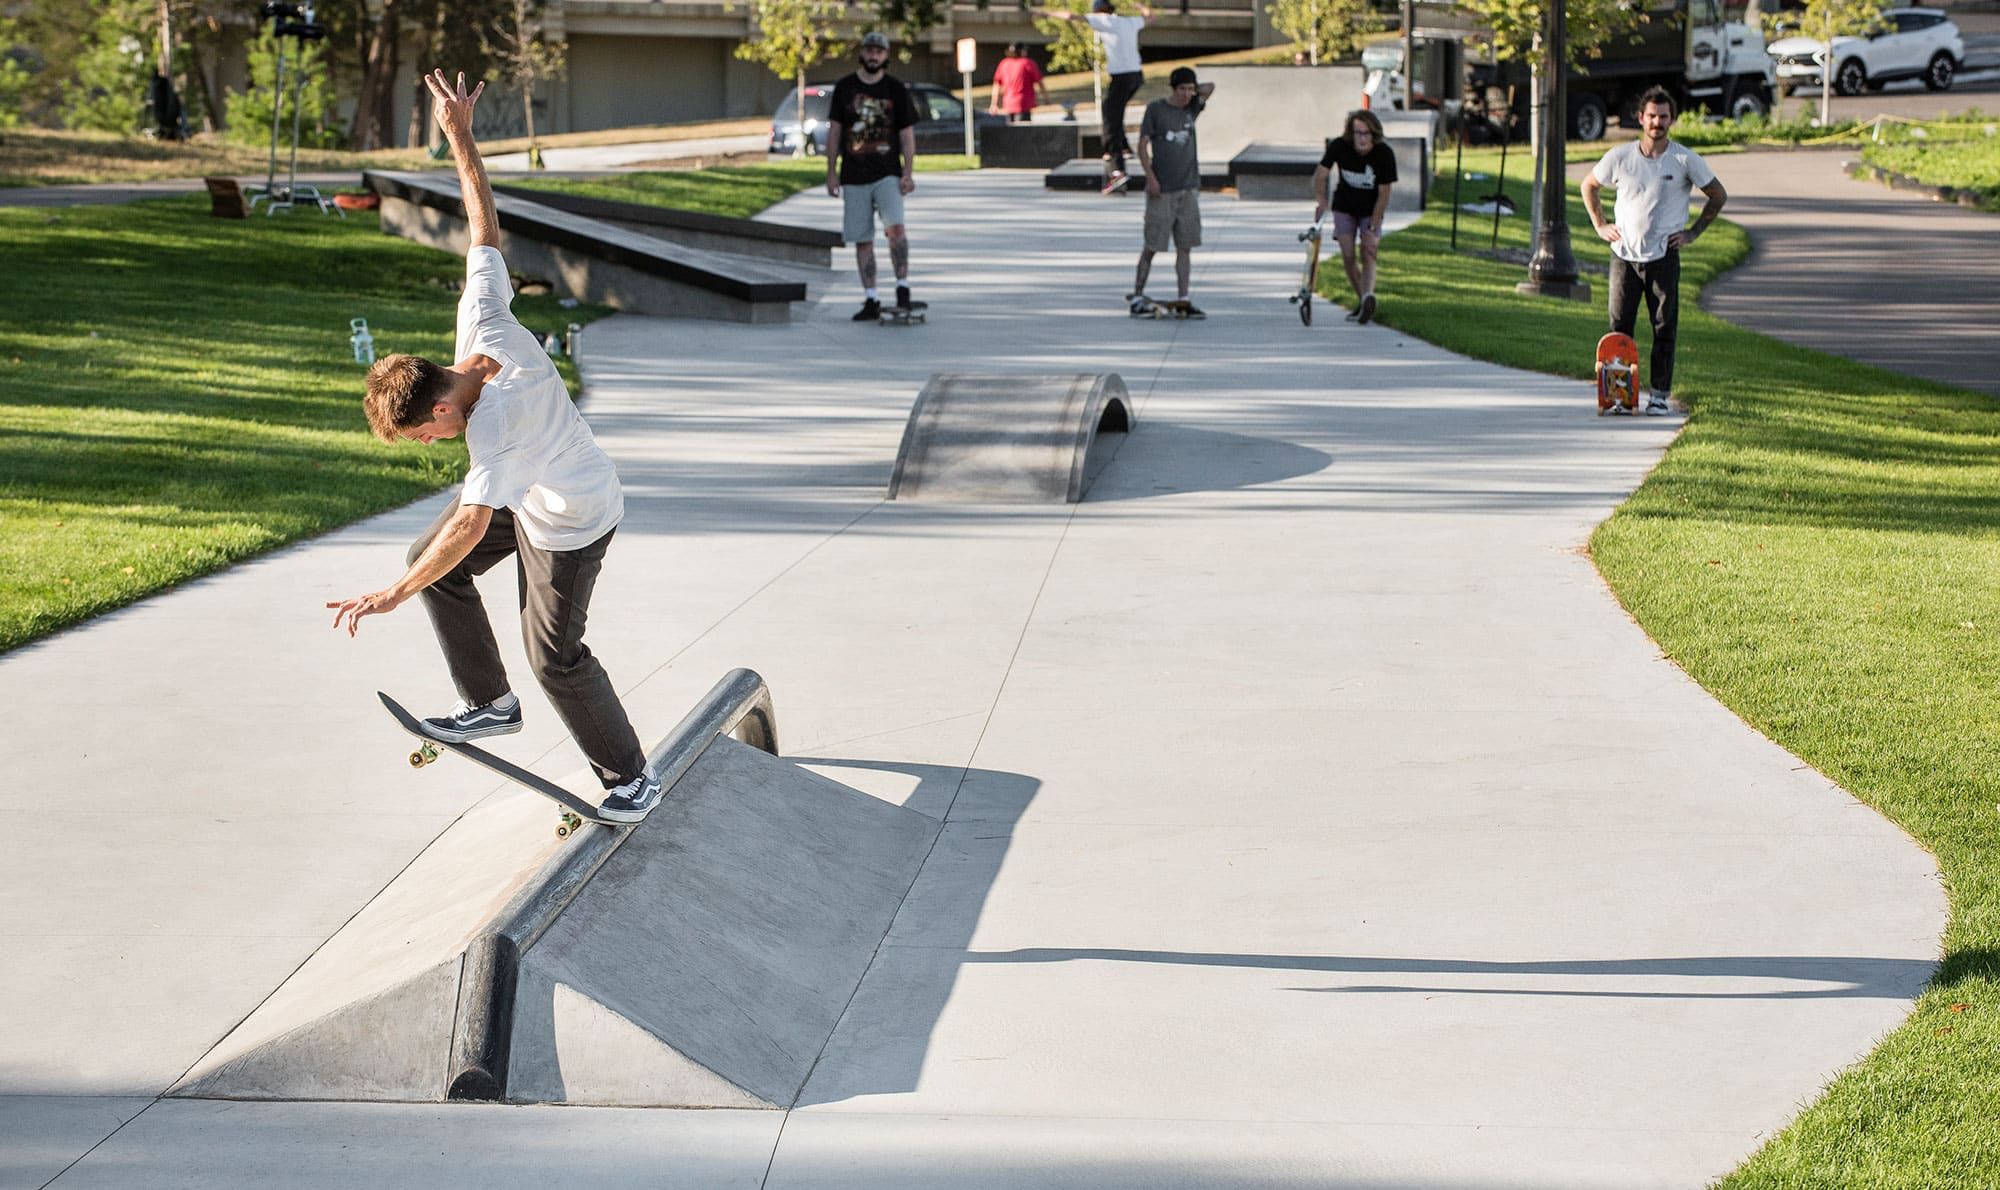 Special skate spots such as the transition into bazooka rail is just one of the many features at Gateway SkatePath